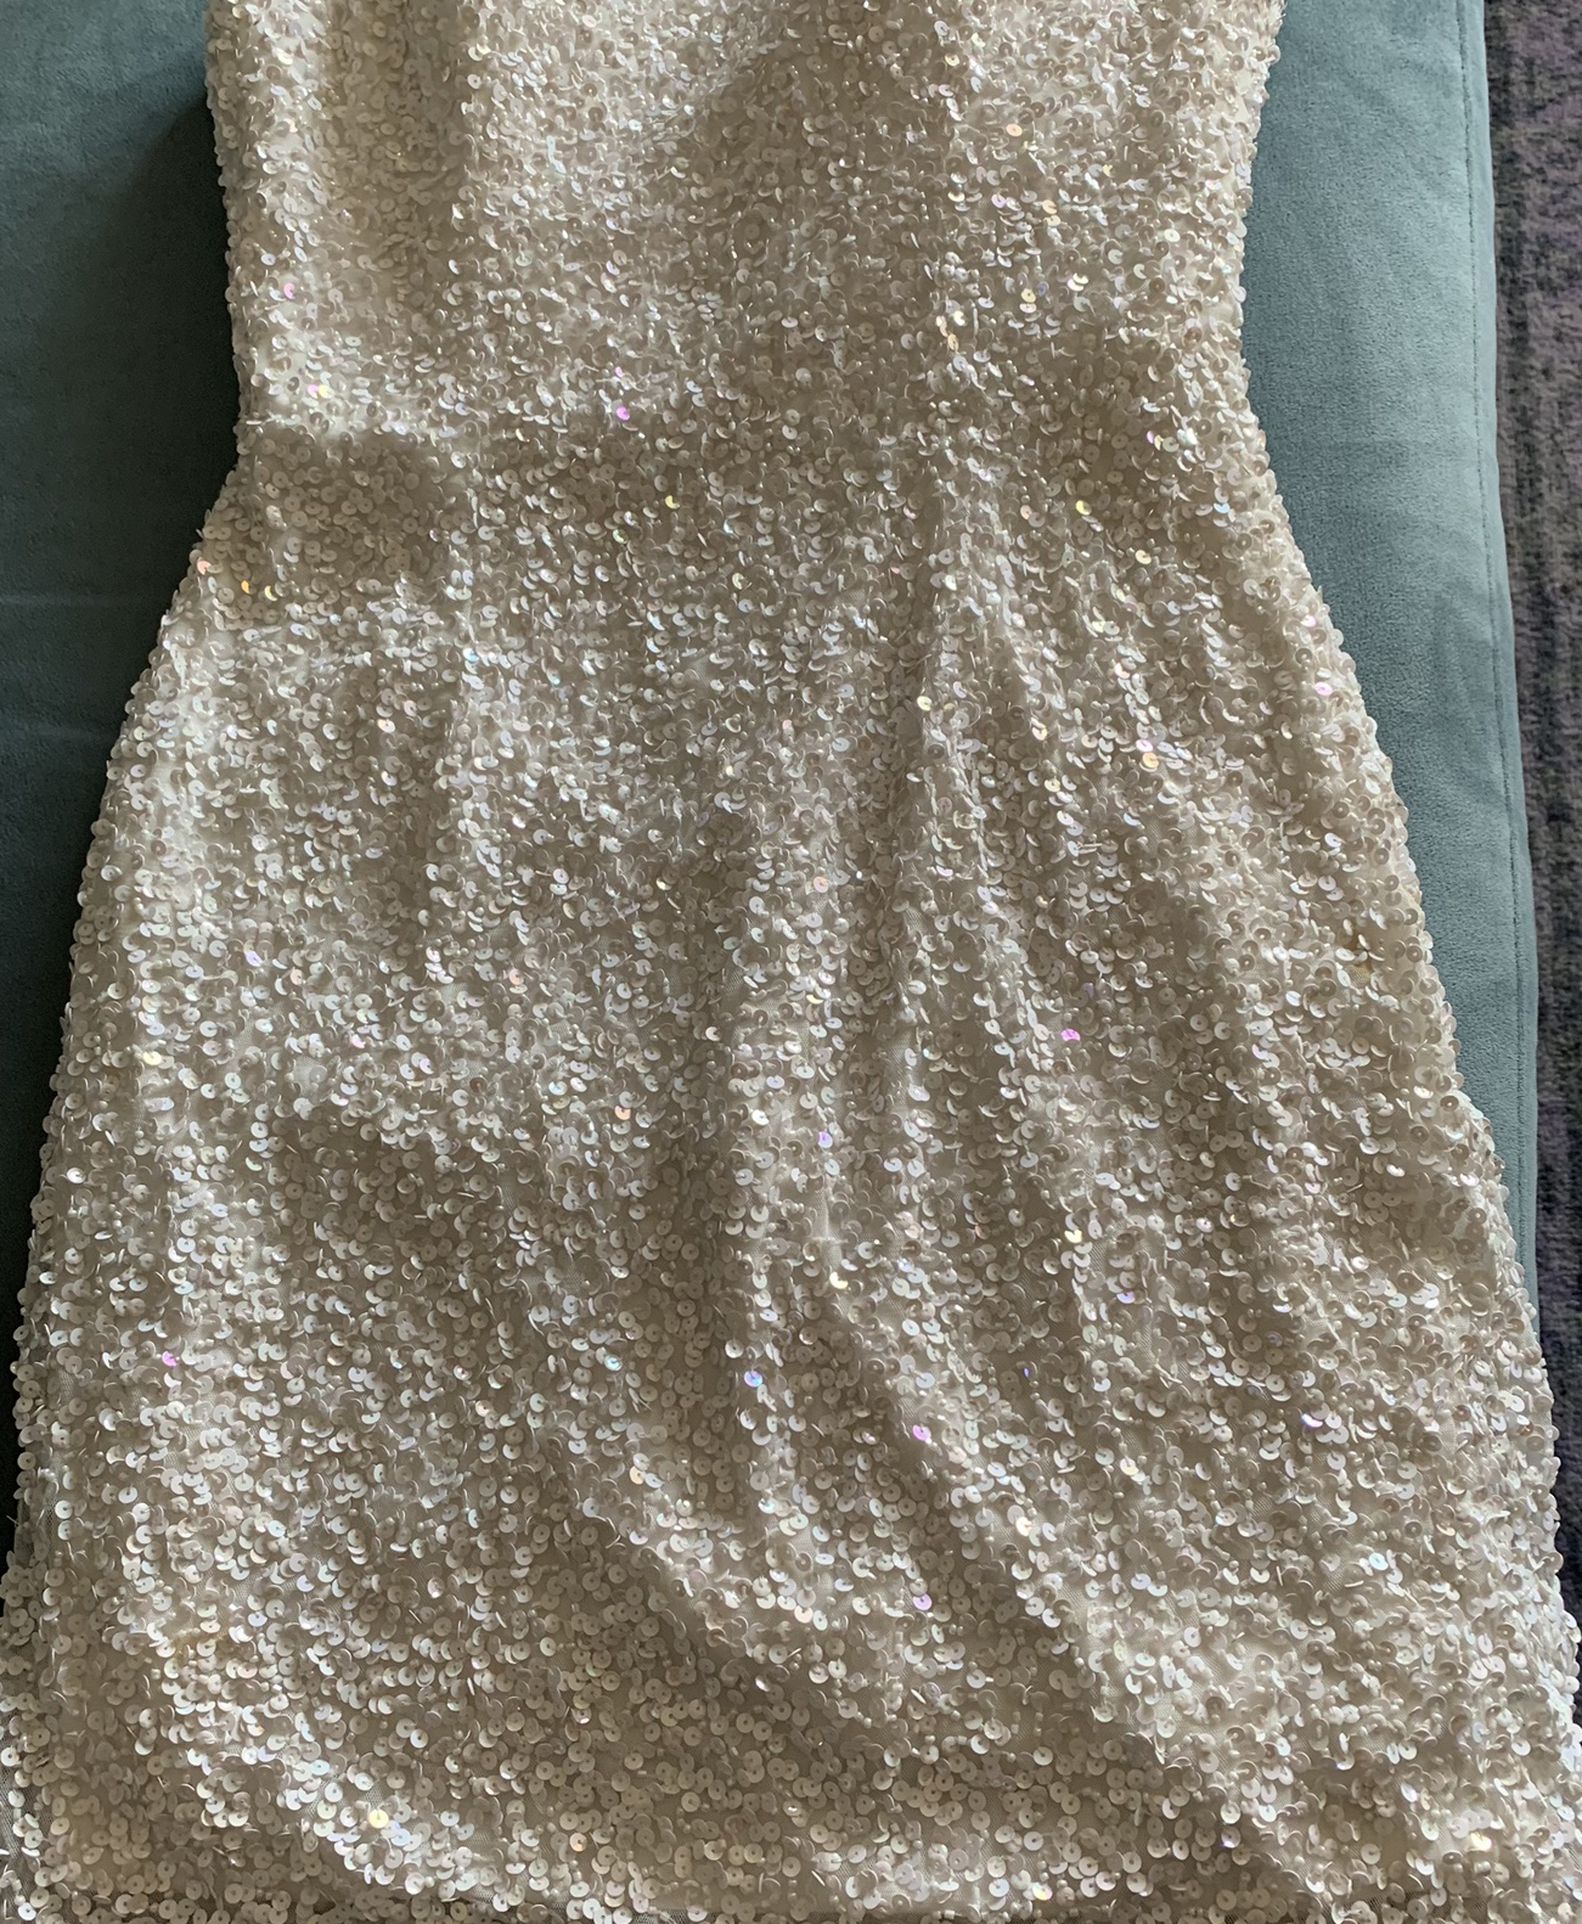 White Sequin Mini Dress- Size 4 ! Worn Once!